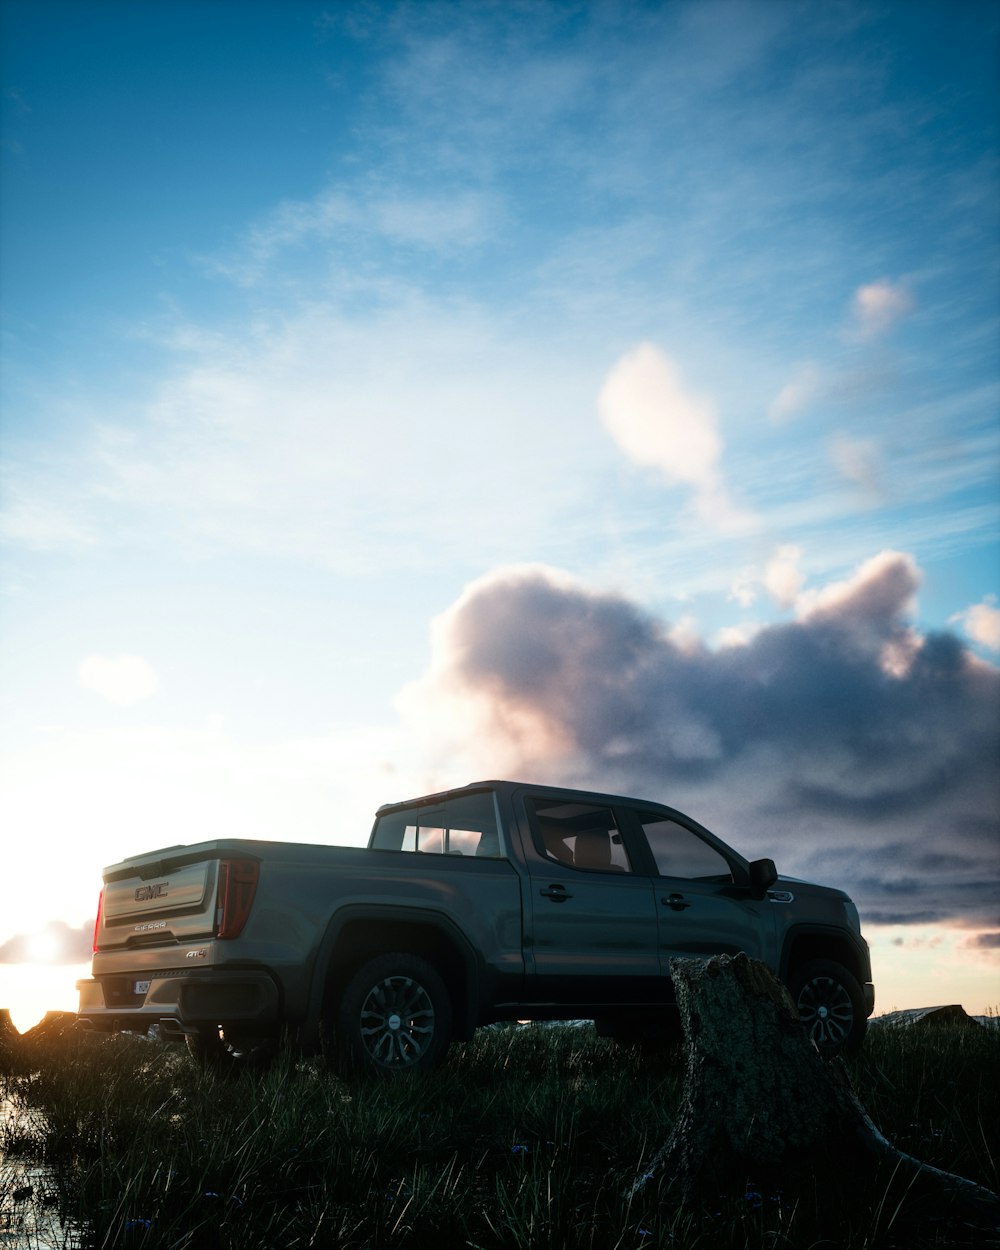 a pick up truck parked in a grassy field